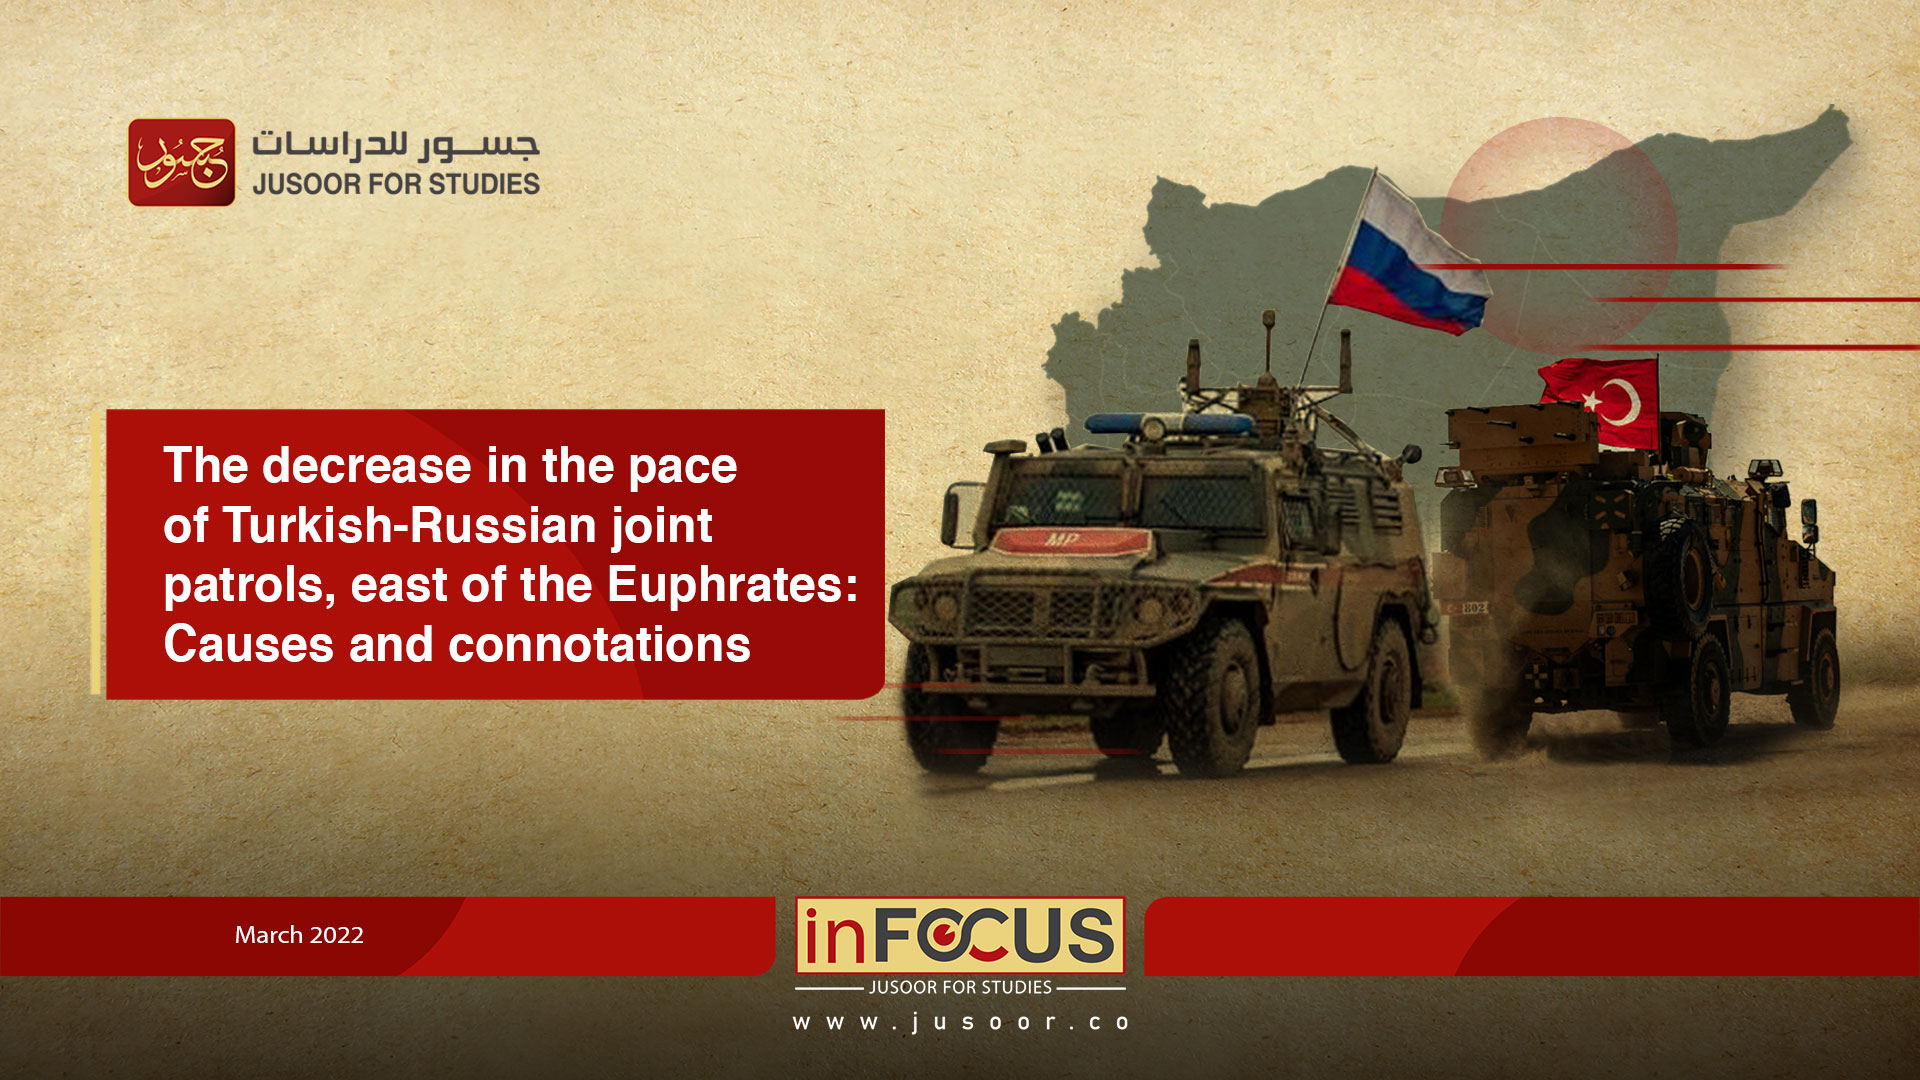 The decrease in the pace of Turkish-Russian joint patrols, east of the Euphrates: Causes and connotations